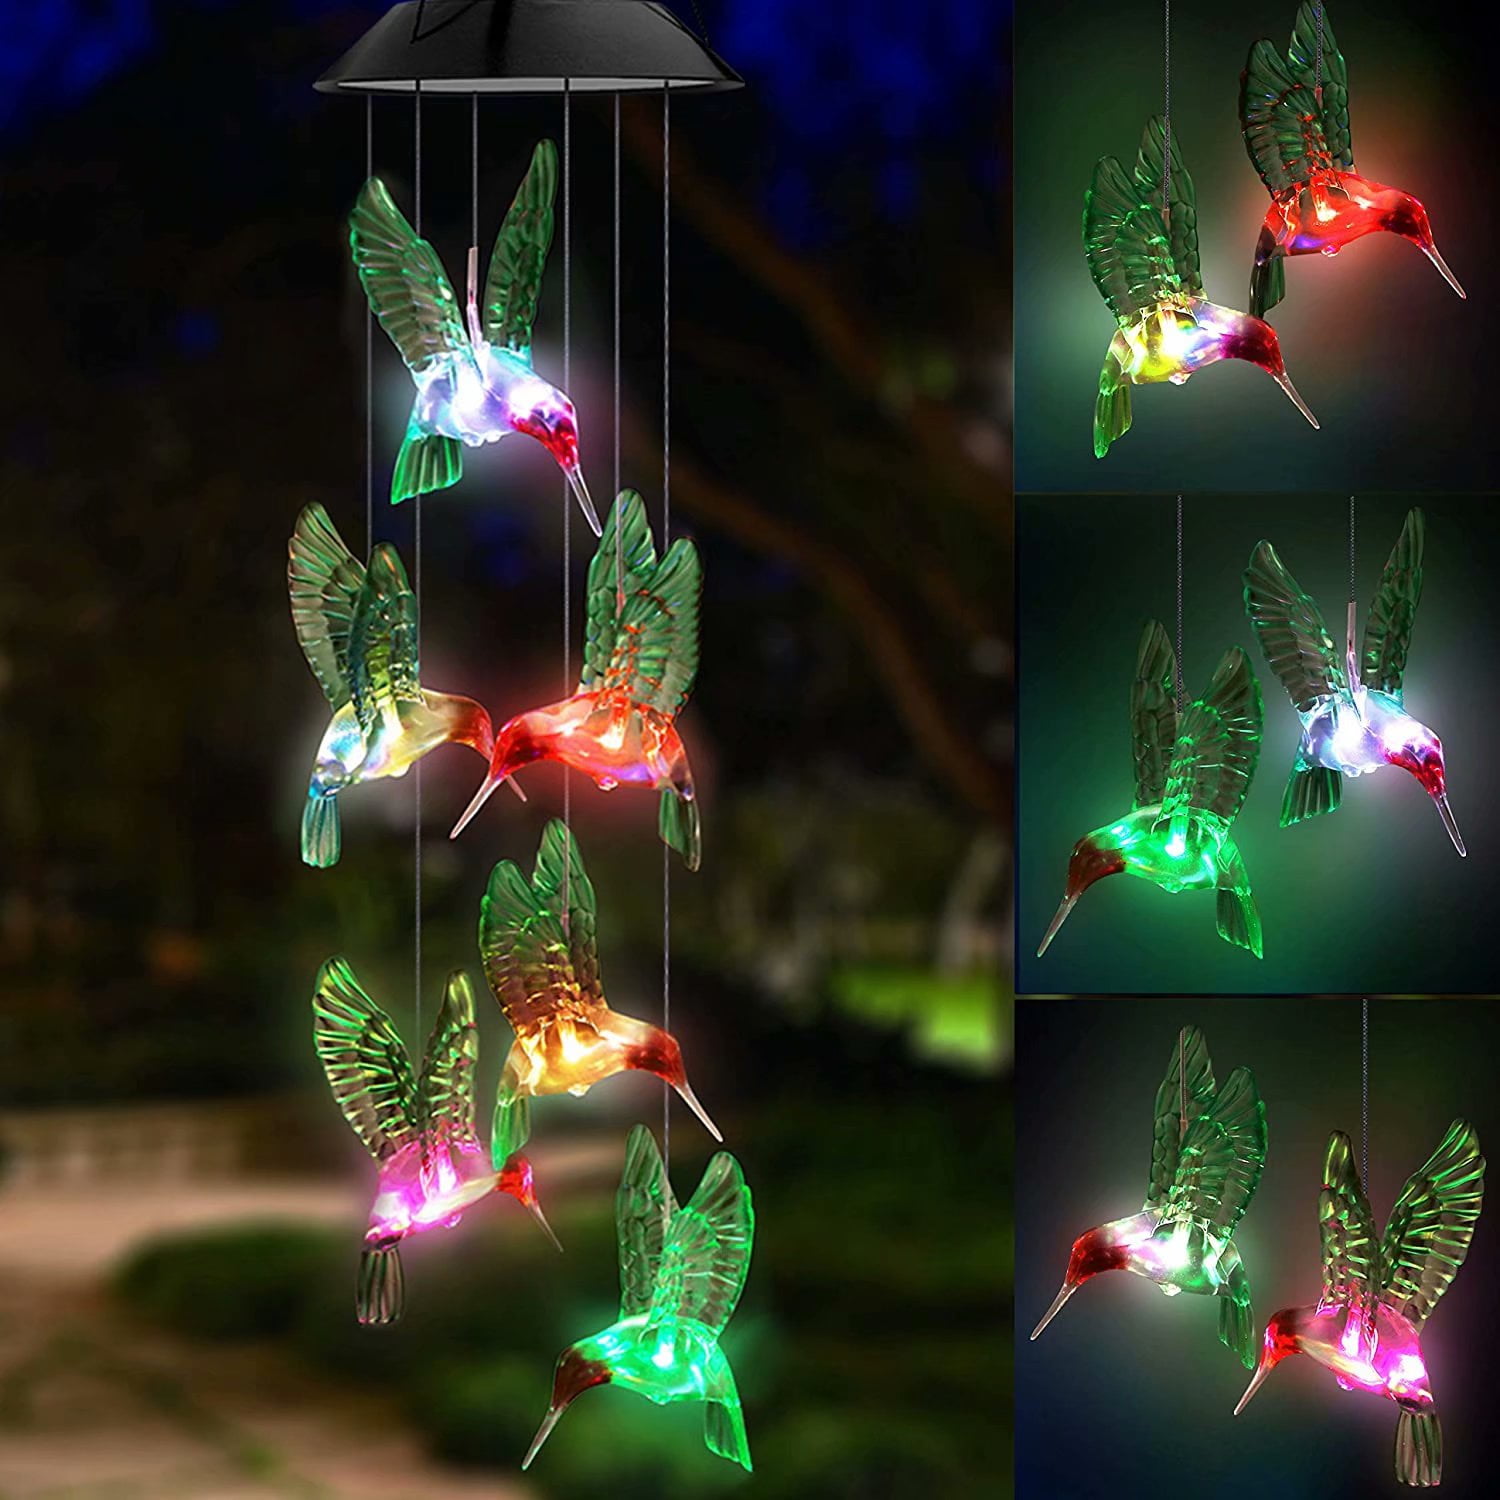 Waterproof LED Wind Chimes for Outside Housewarming Gifts for Garden Patio Yard Home Decor Solar Powered Memorial Wind Chimes with Lights Rizzon Solar Wind Chimes Changing Colors